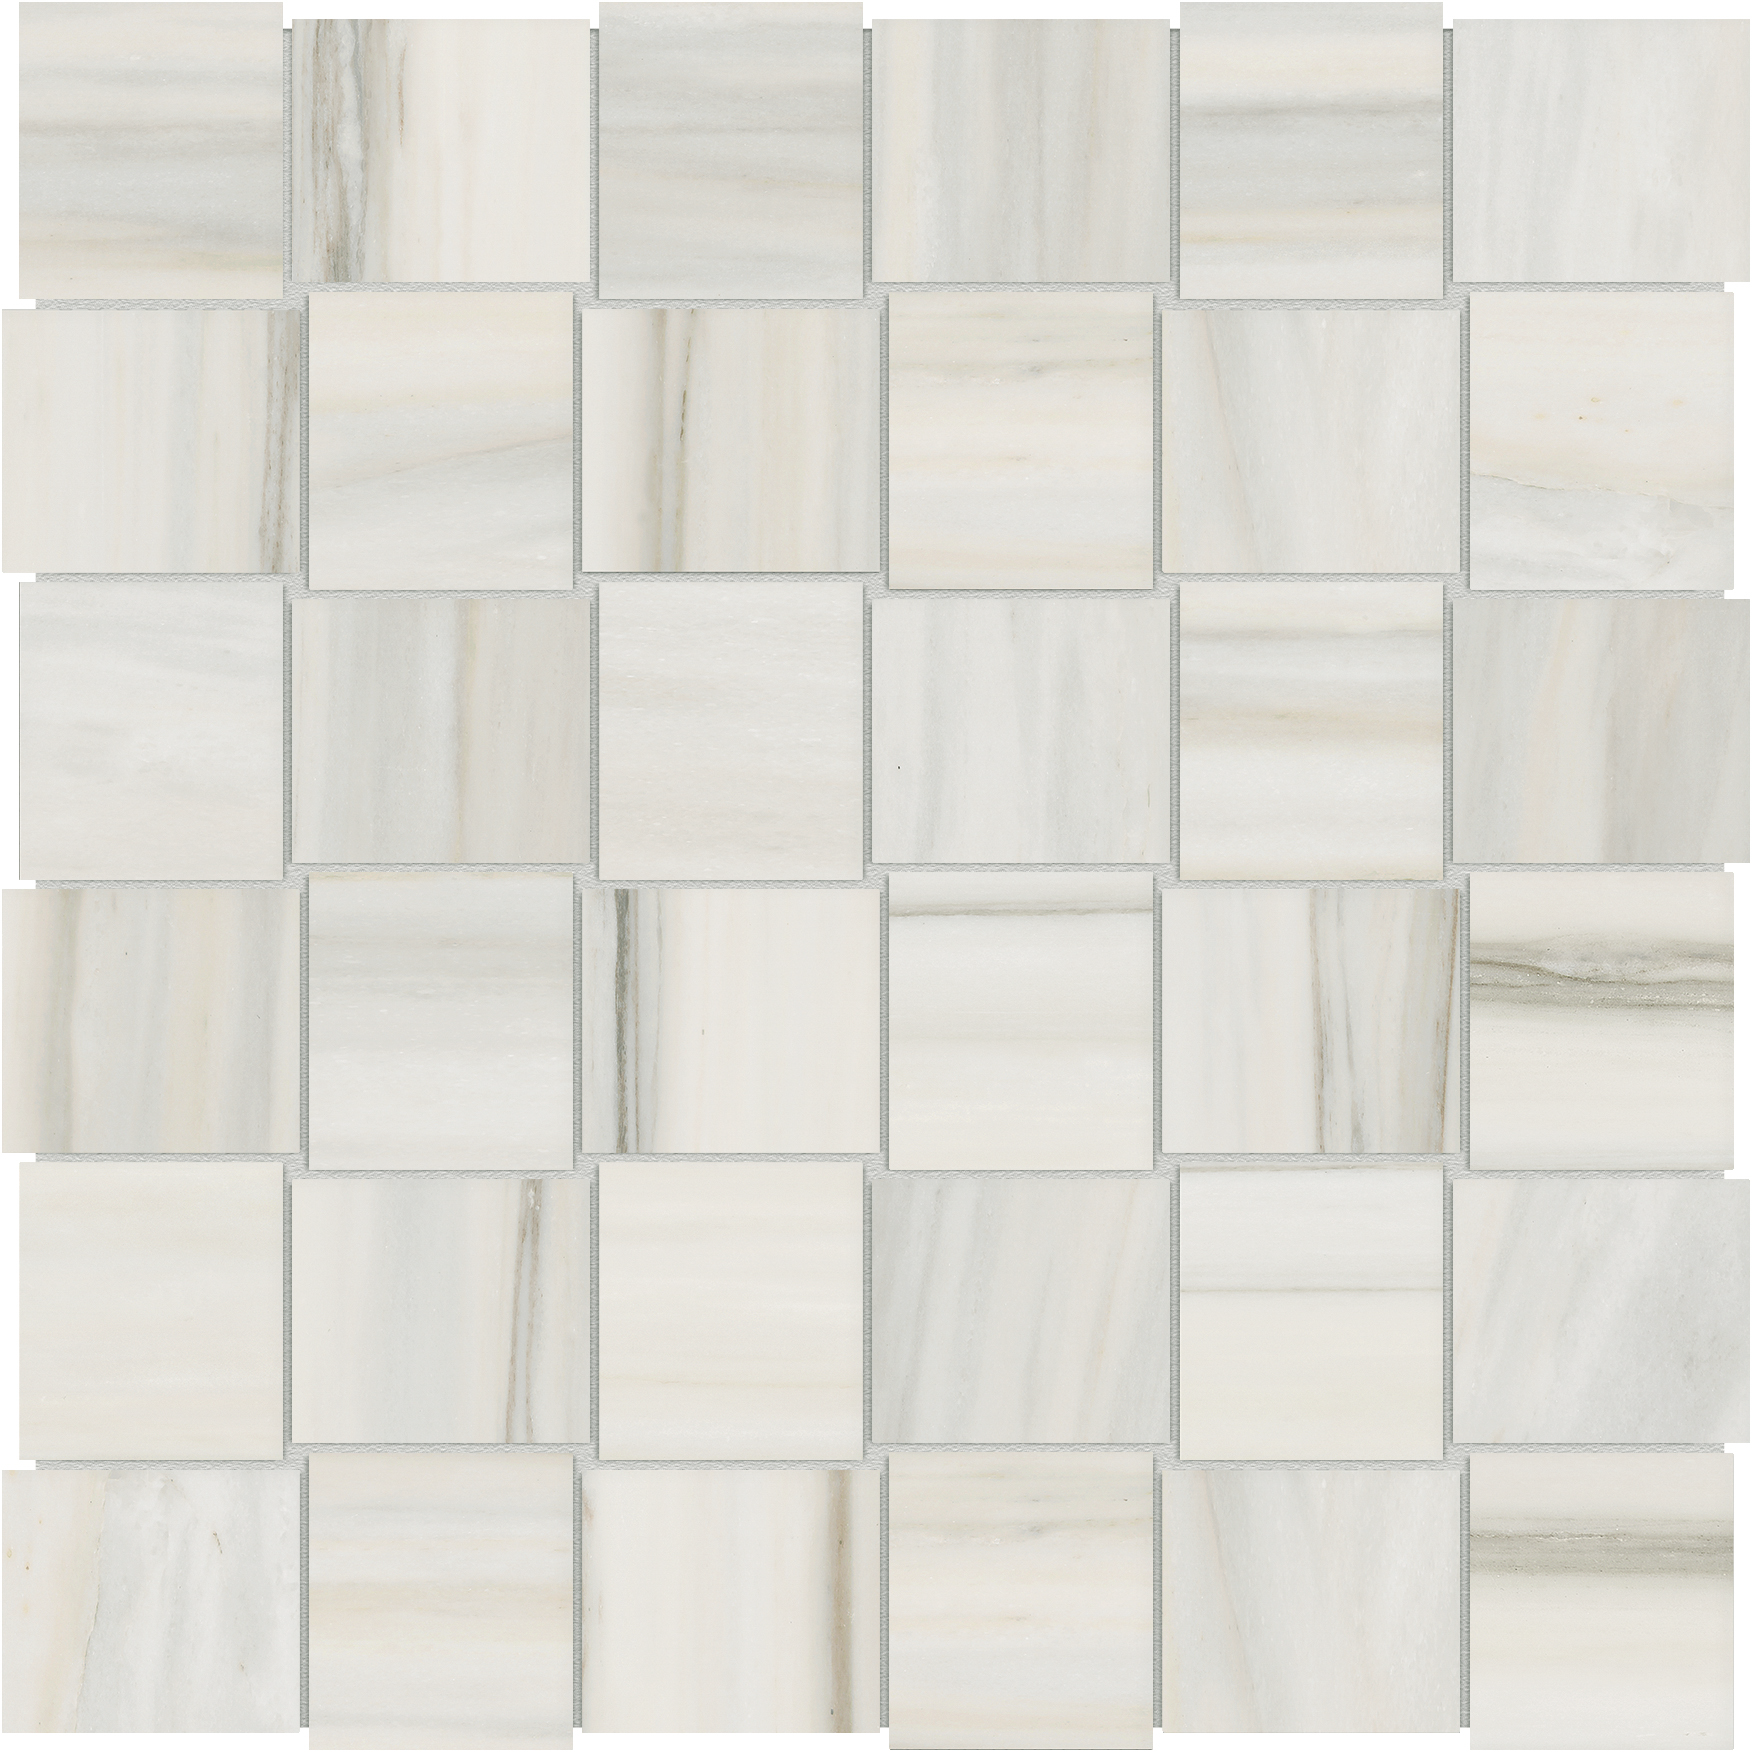 zebrino basketweave 2x2-inch pattern glazed porcelain mosaic from mayfair anatolia collection distributed by surface group international matte finish straight edge edge mesh shape